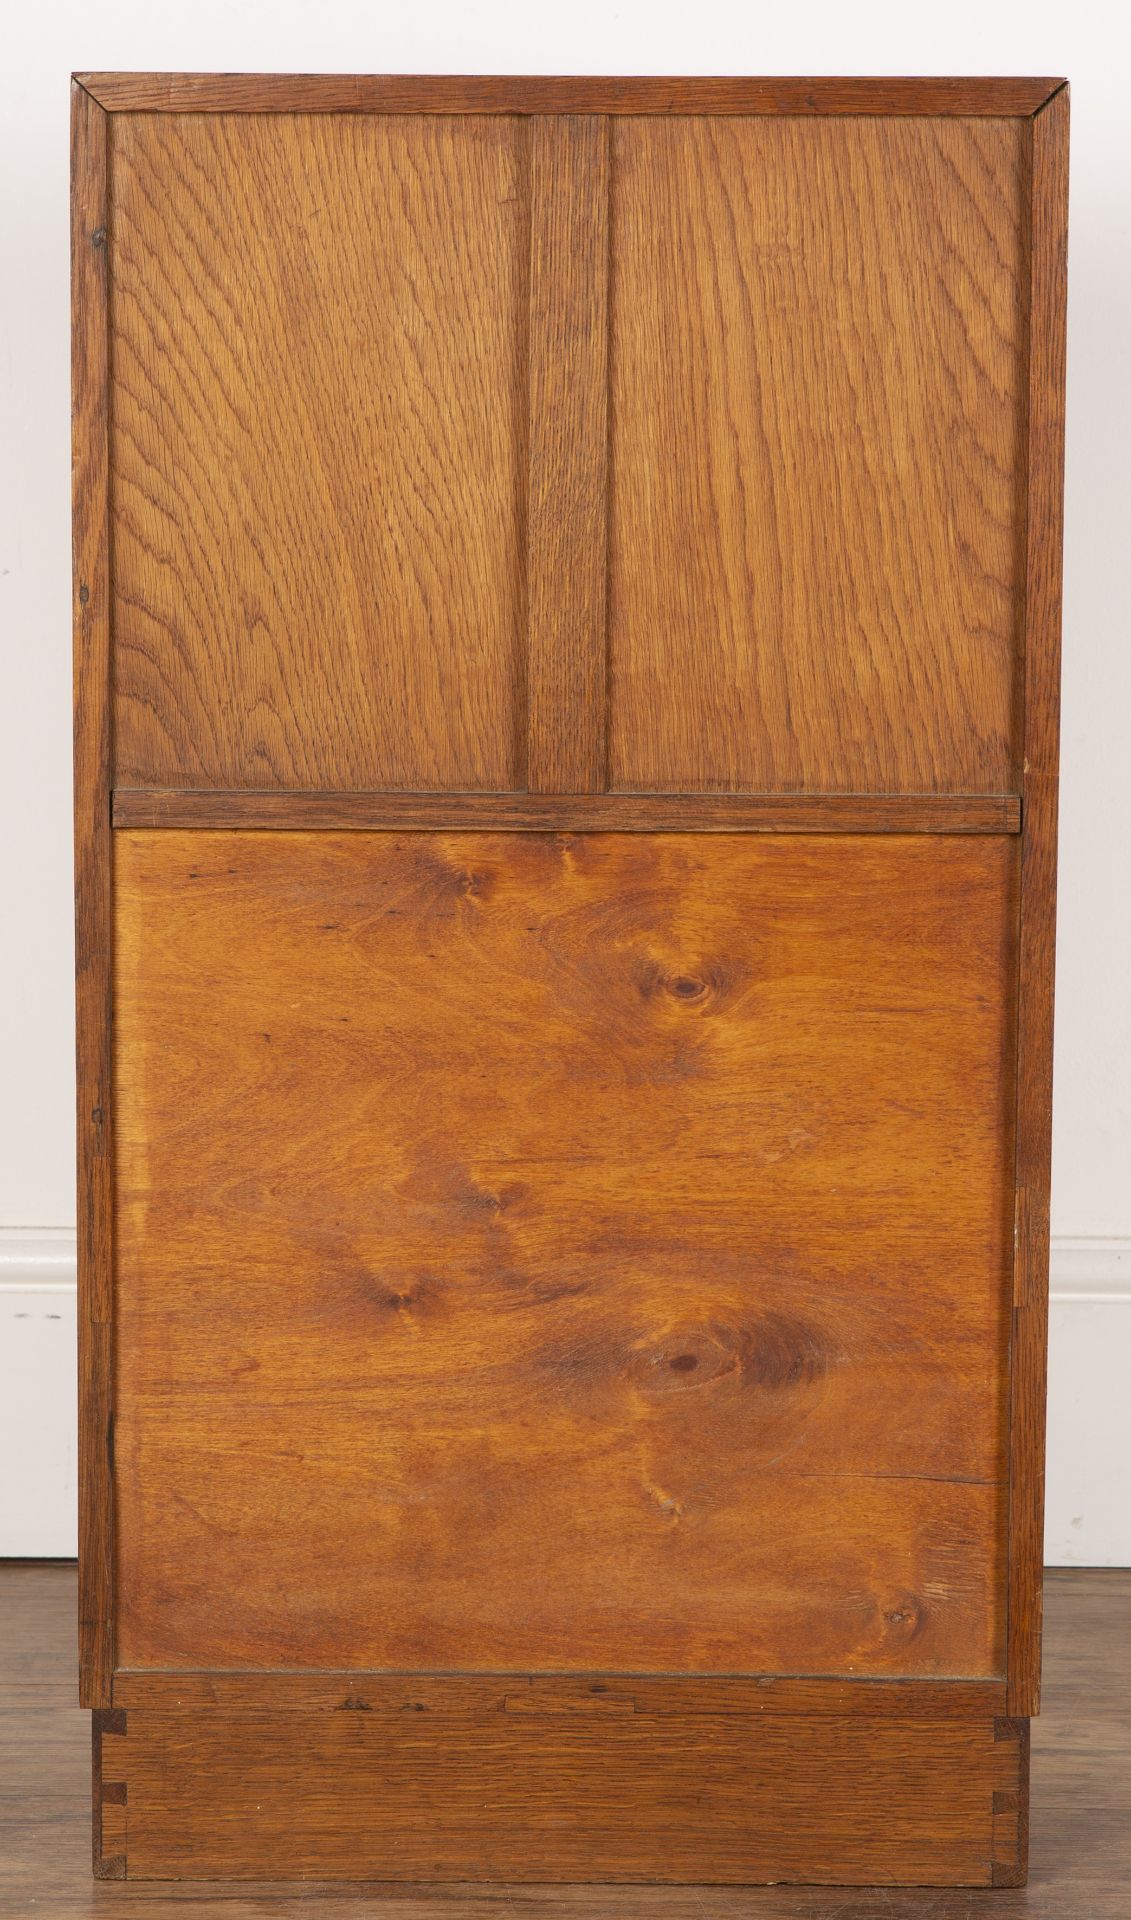 Attributed to Heals oak, small cupboard or bedside table, with open shelf above a fielded panel - Image 5 of 5